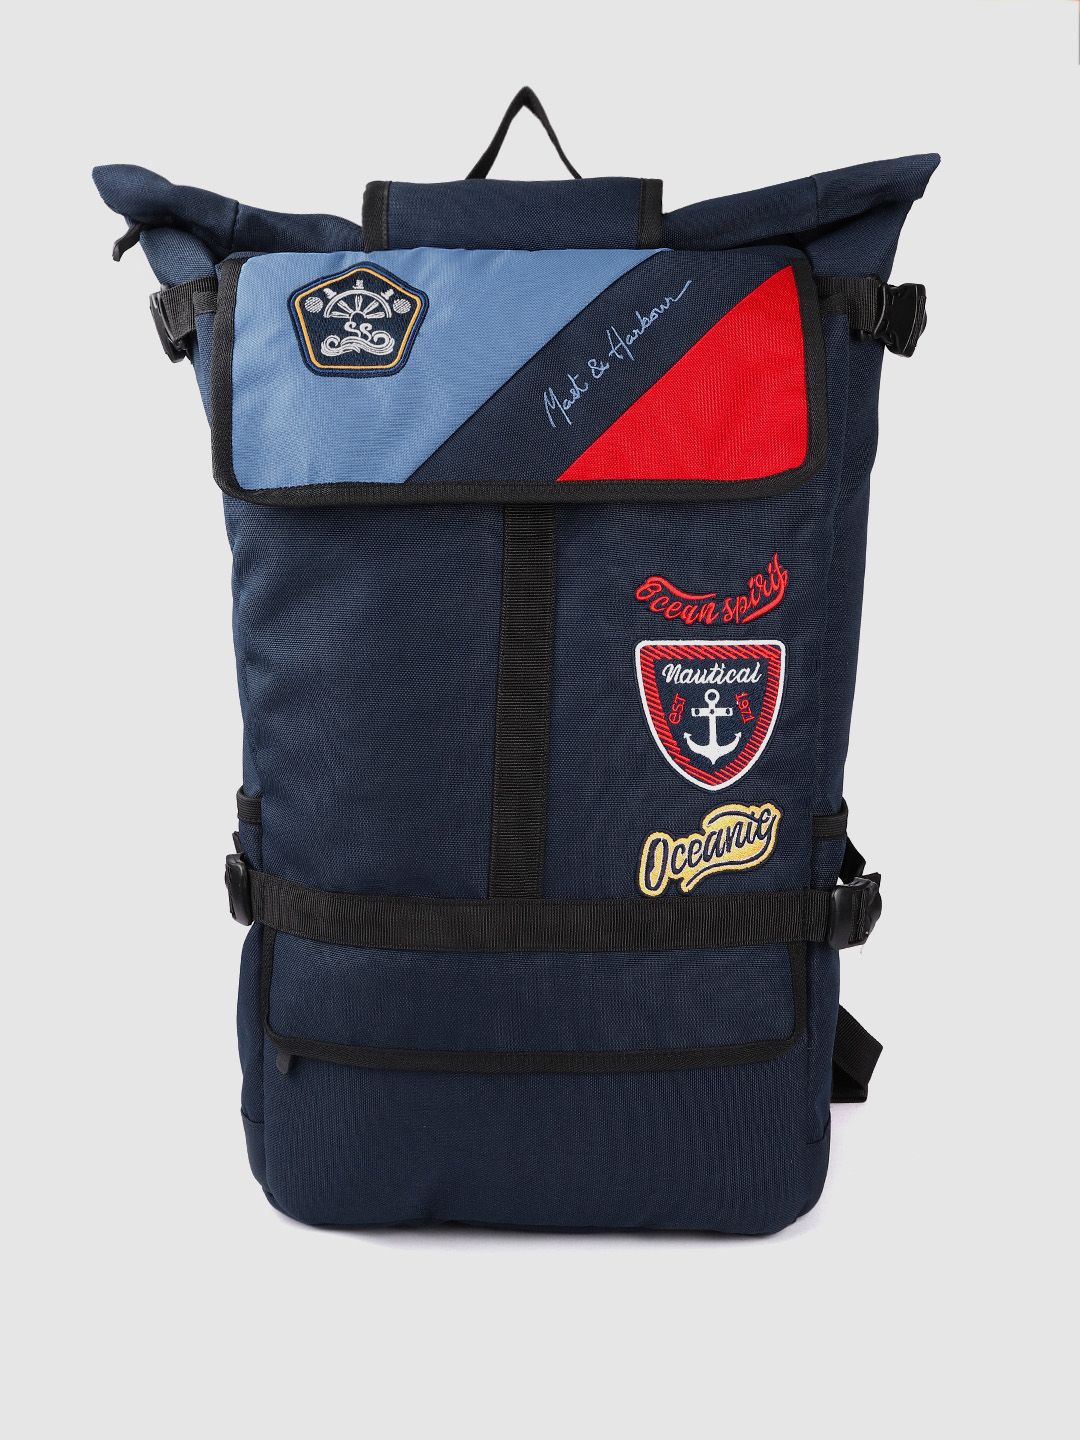 Mast & Harbour Unisex Teal Blue & Red Solid Applique Detail Backpack 21.4 L Price in India